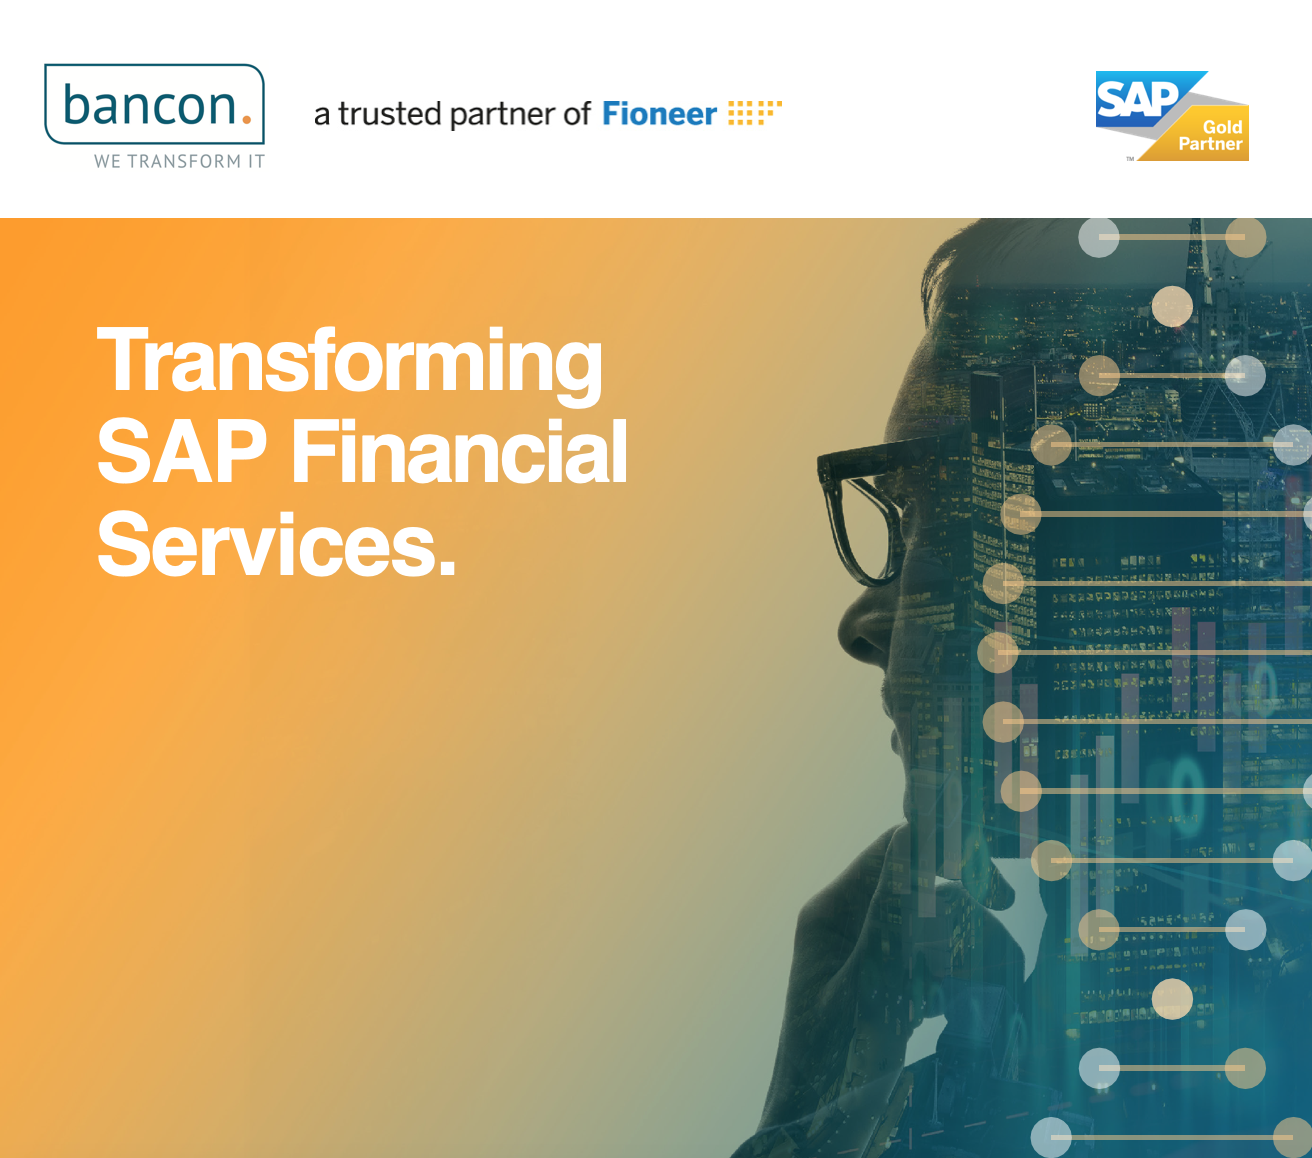 transforming-sap-fioneer-financial-services.md